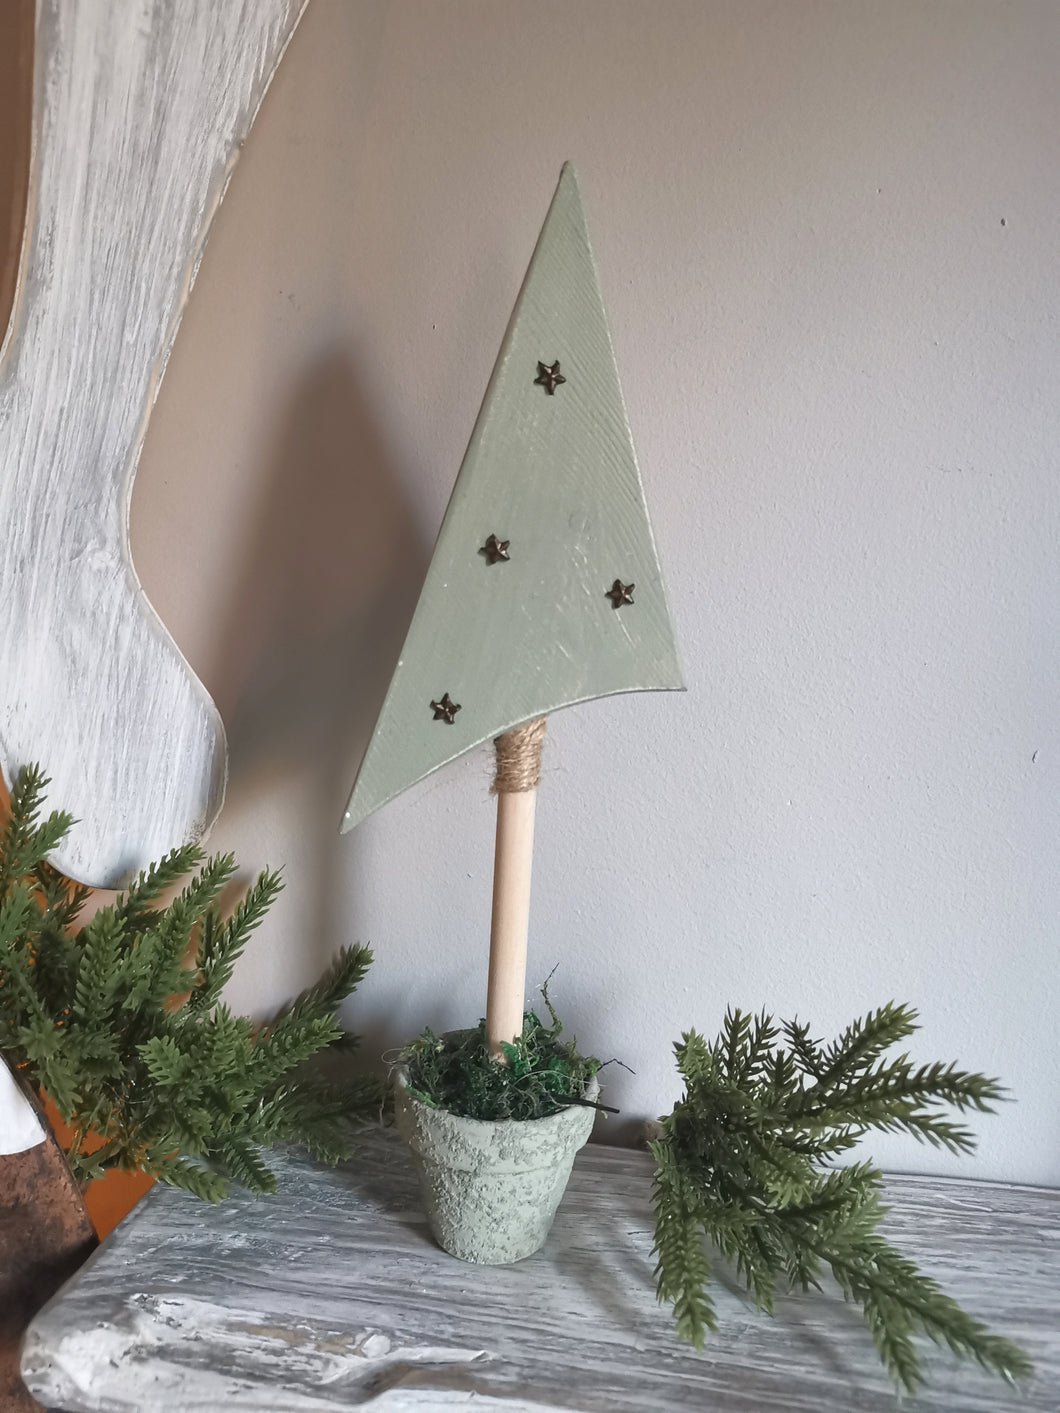 Angled wooden potted trees